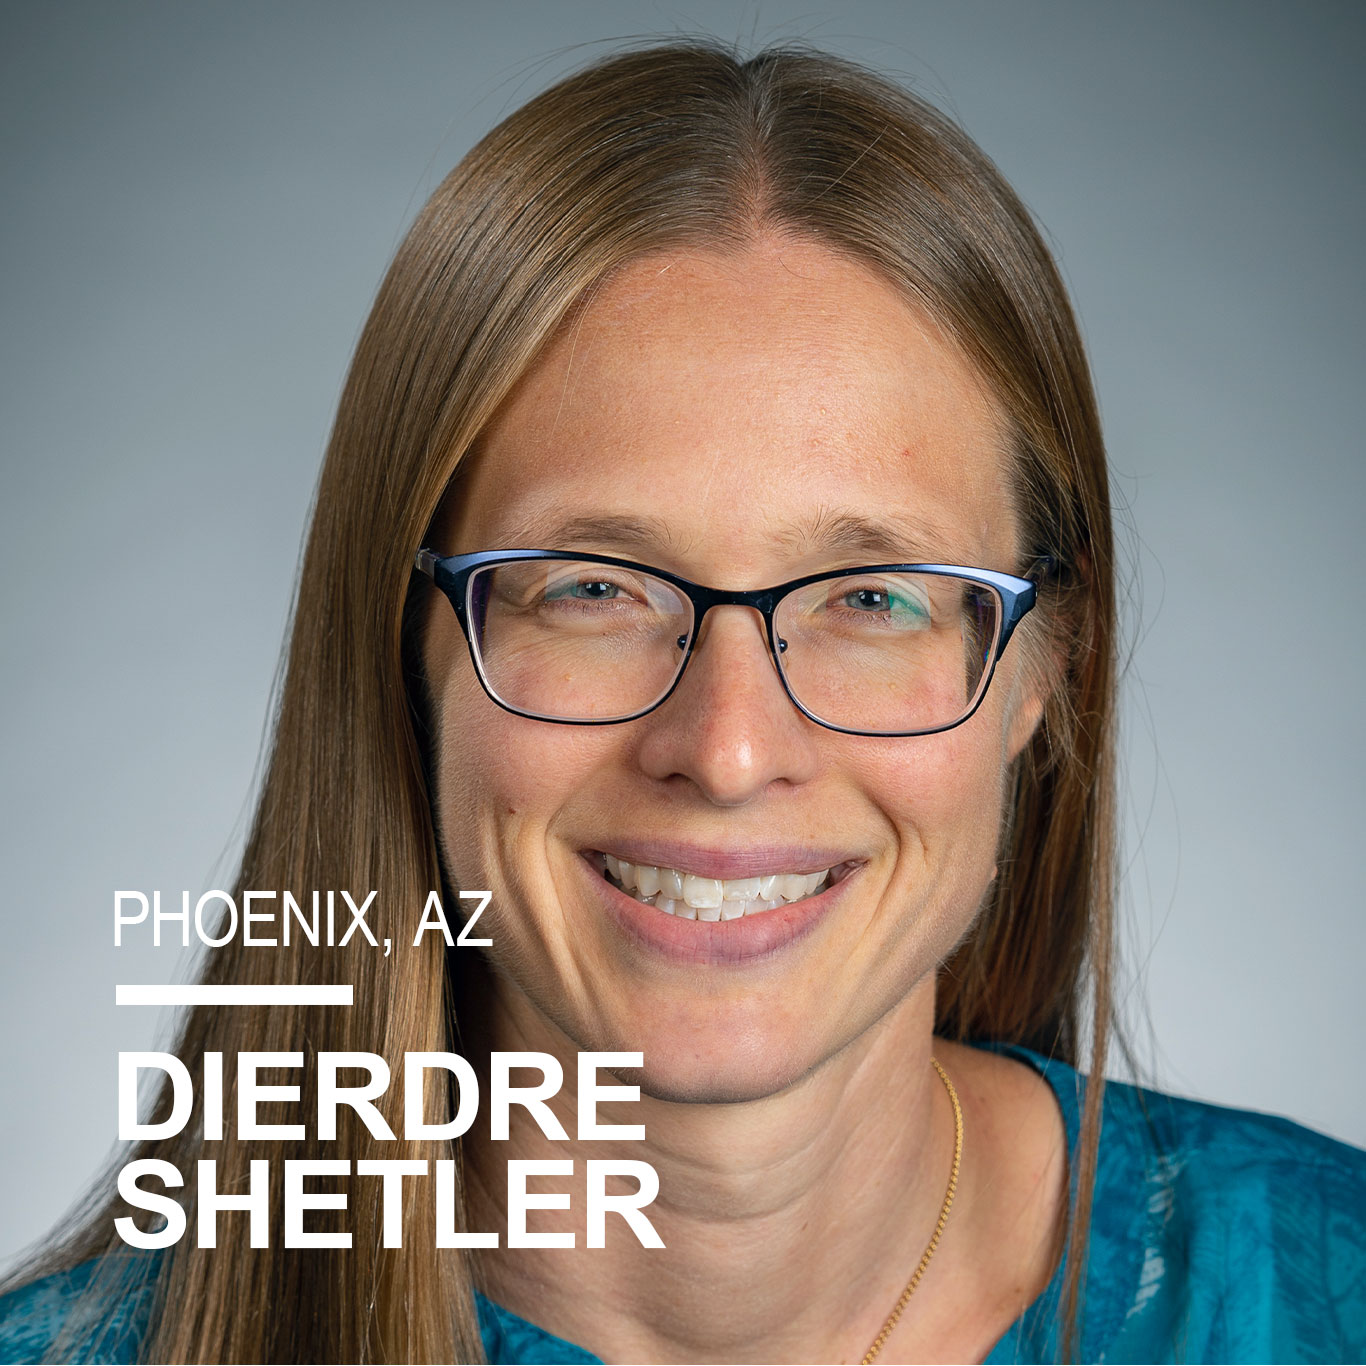 Dierdre Shetler is a STEM instructional technology specialist for the Cartwright School District in Phoenix, AZ. She’s a Google Product Expert for Google Classroom, a Google Certified Trainer, and an ITEEA Authorized Teacher Effectiveness Coach and holds a bachelor’s degree in Elementary Education and a master’s degree in Educational Technology. Dierdre won the 2017 ITEEA Prakken Award for Professional Cooperation and the 2018 Superintendent’s Award of Excellence. She loves bringing new possibilities to students through STEM and getting new teachers hooked on STEM in the classroom.